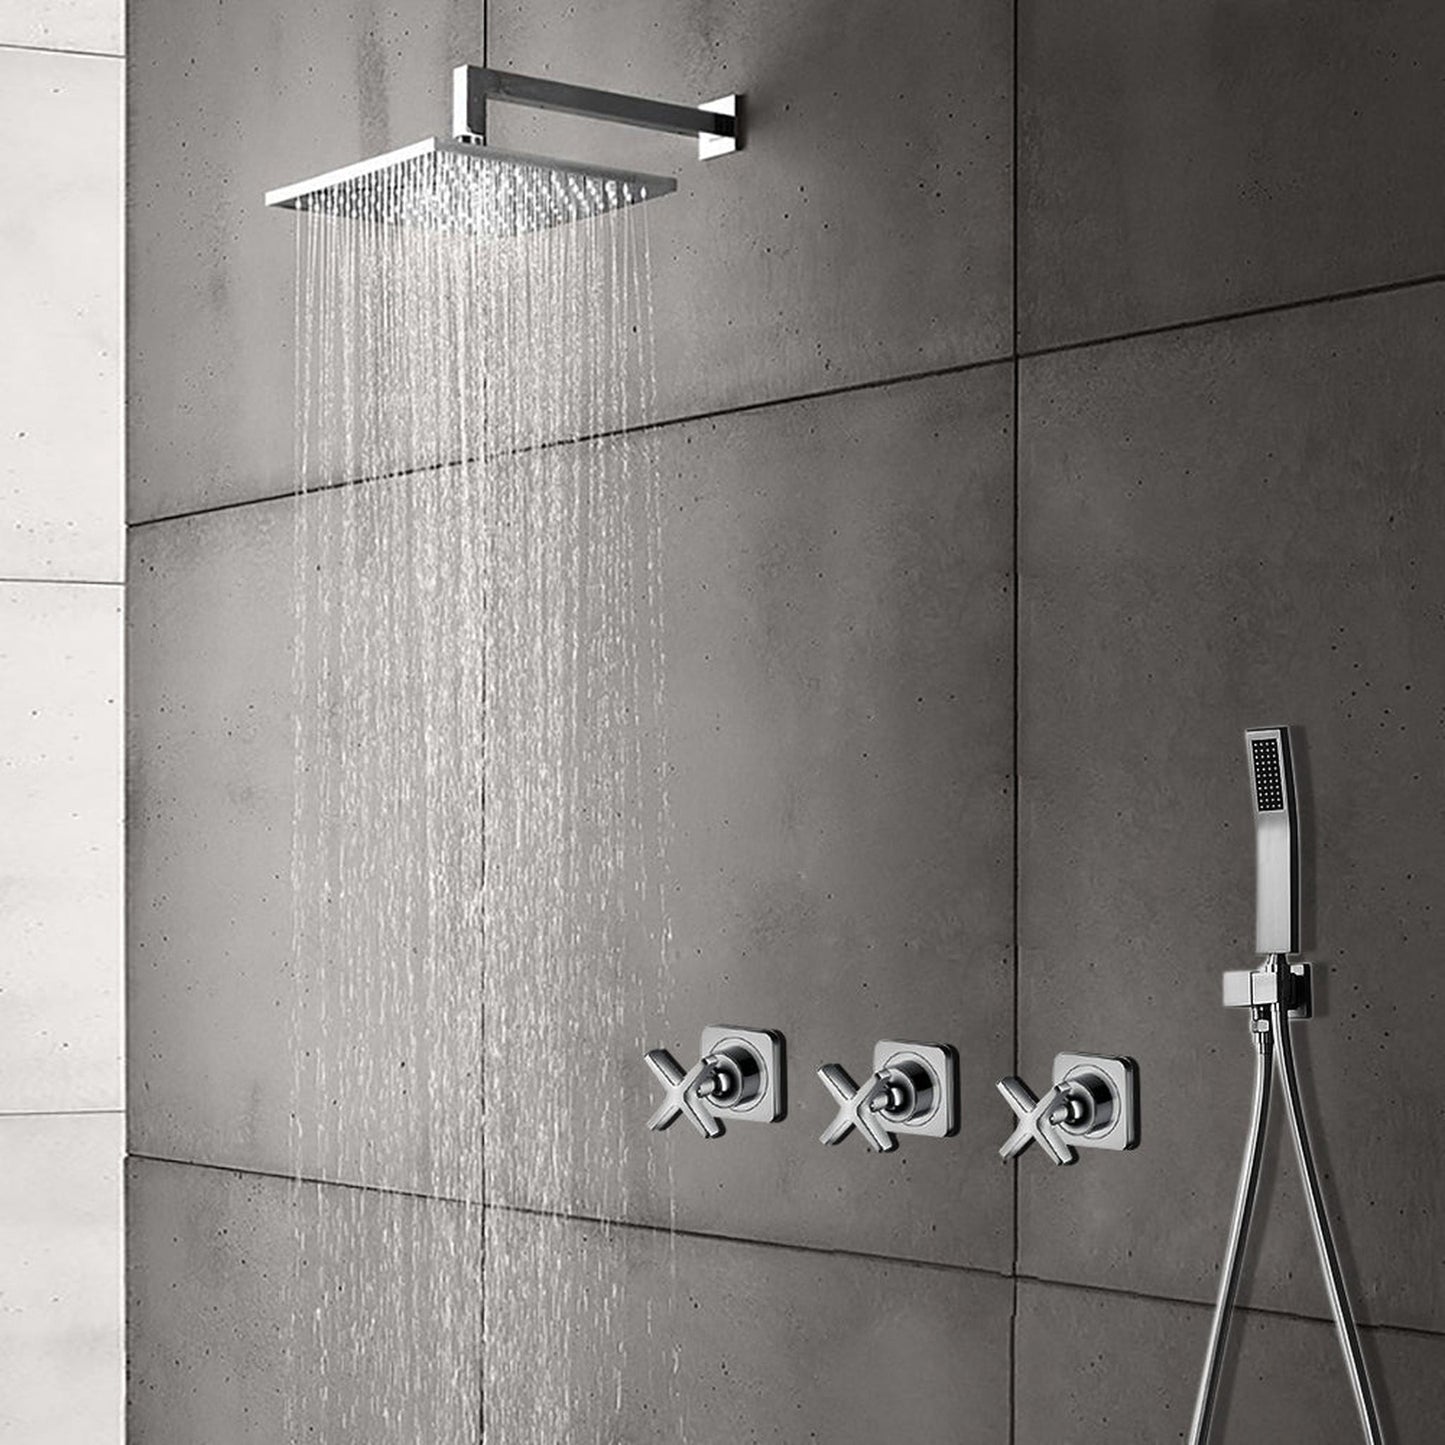 Fontana Tagress 10" Chrome Square Wall-Mounted LED Color Changing Shower System With Hand Shower and Without Water Powered LED Lights